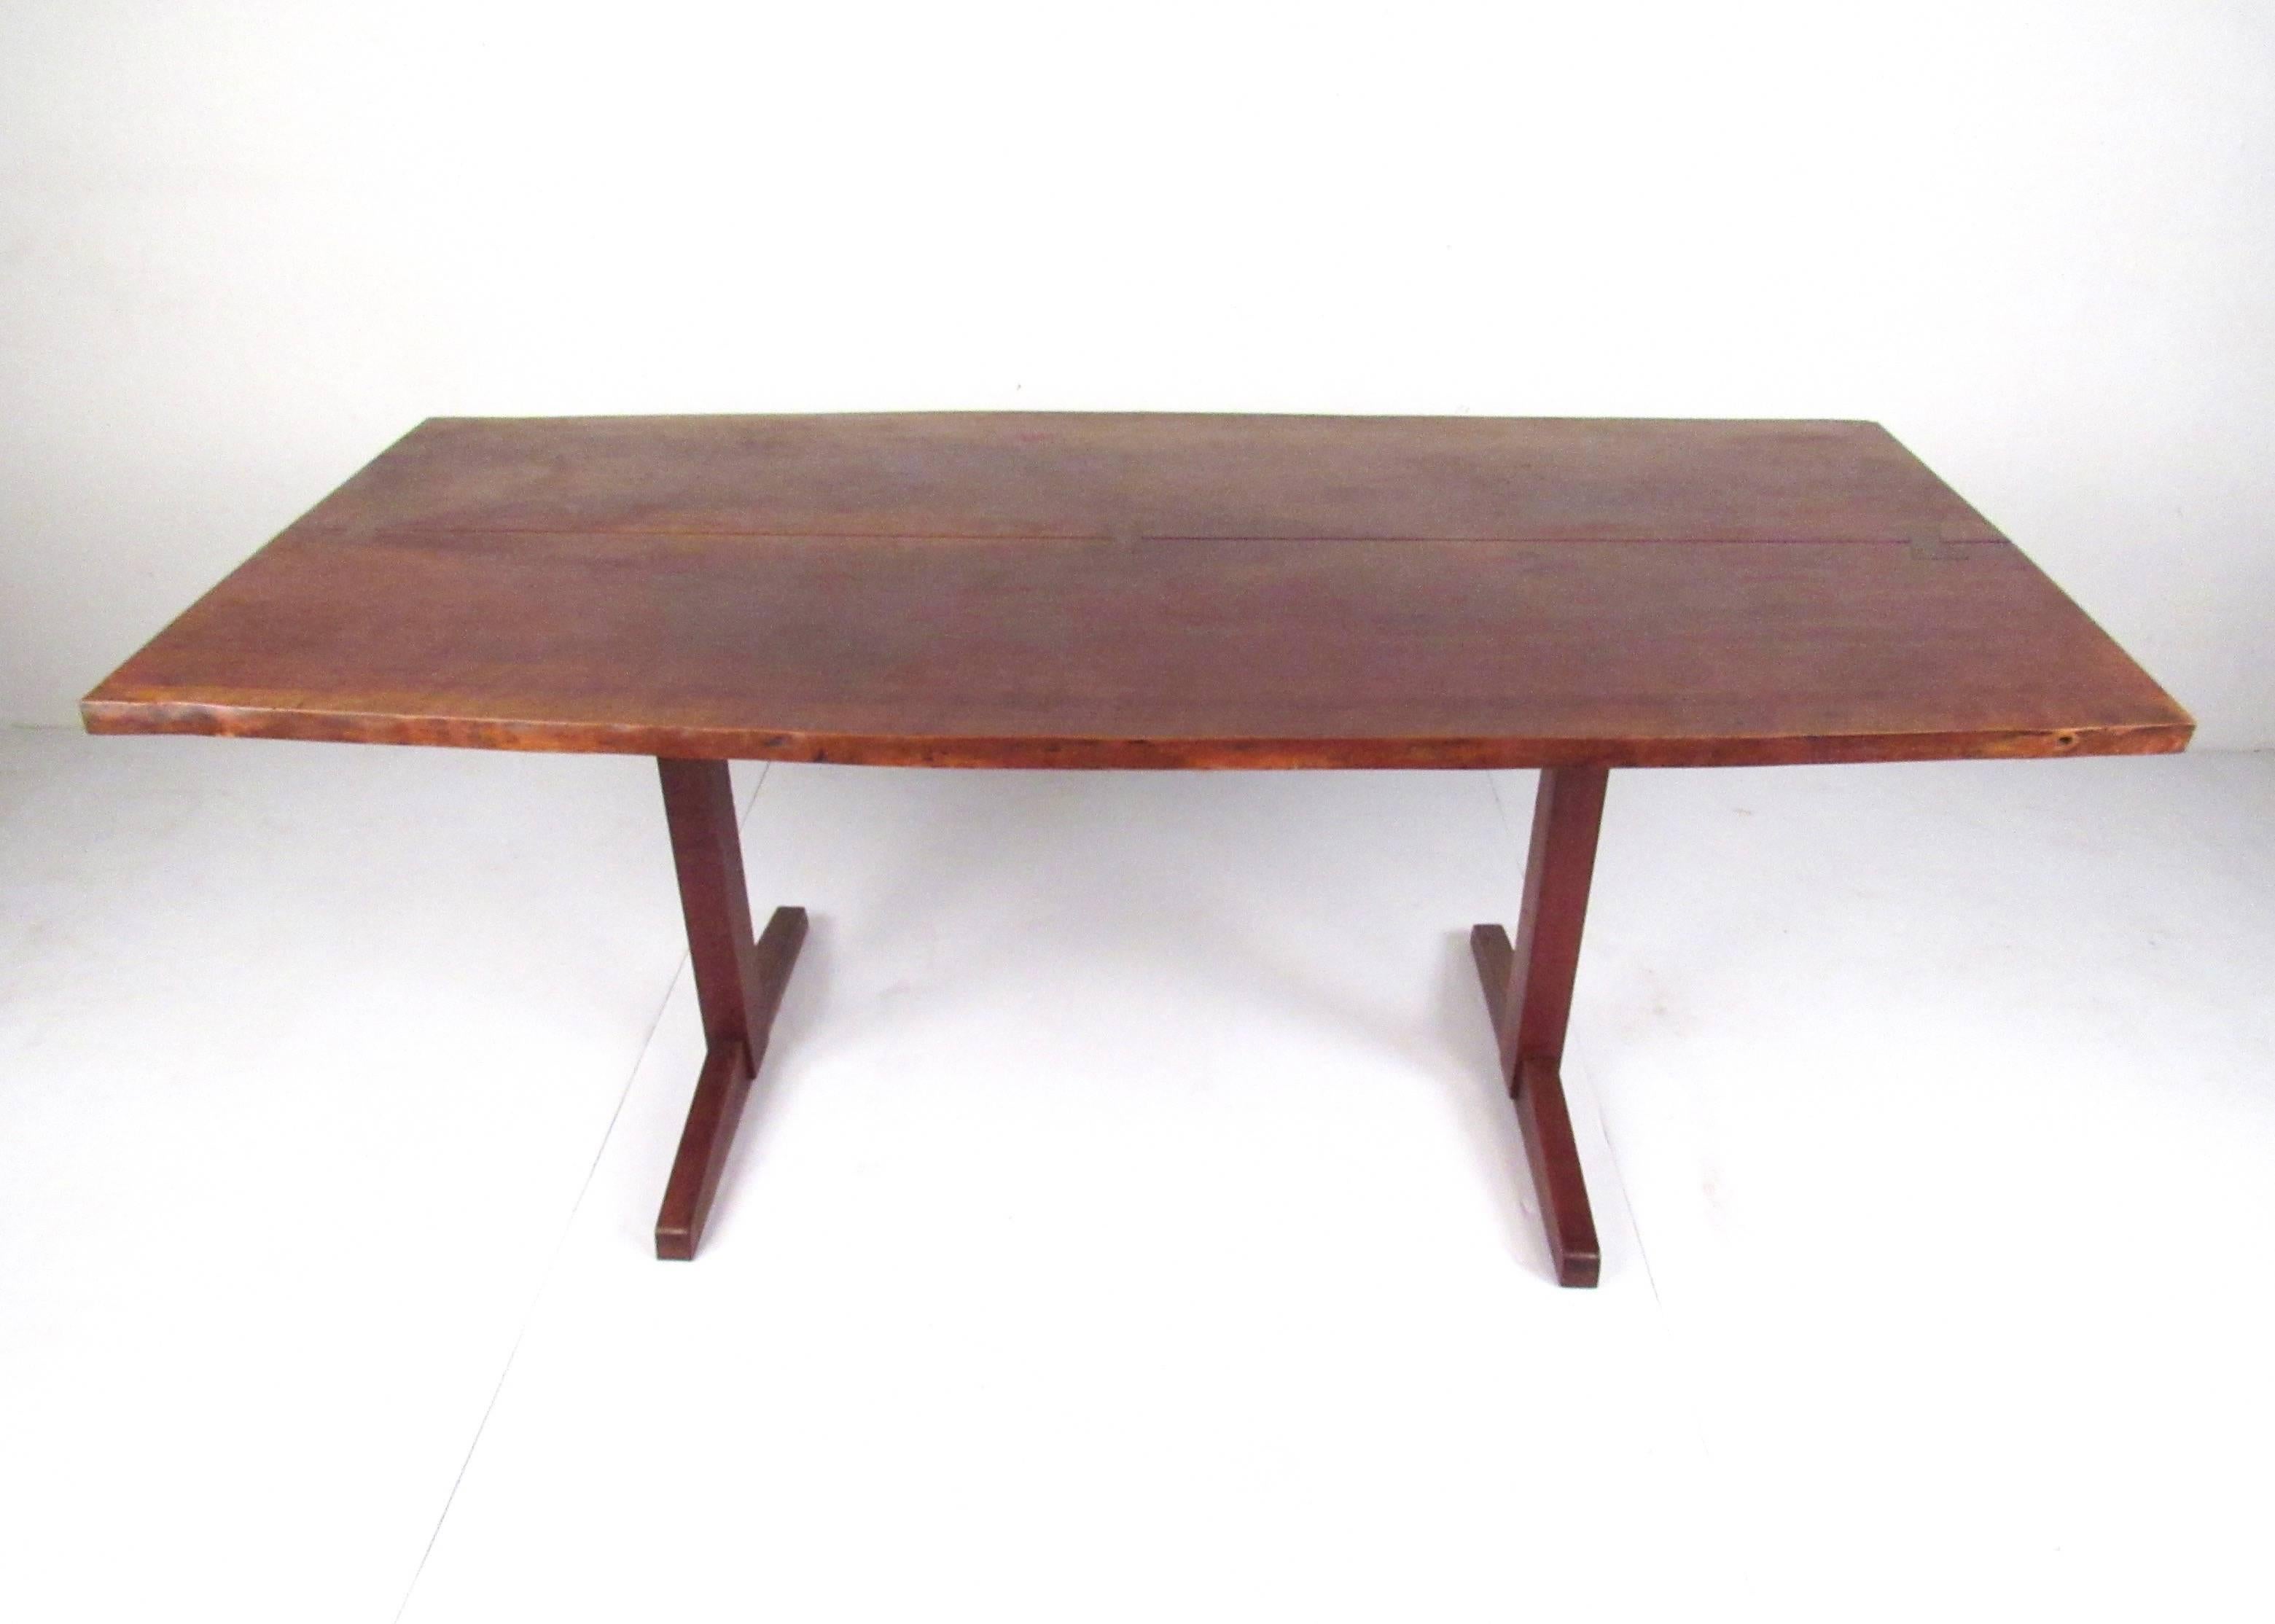 This vintage walnut dining table by George Nakashima features free-flowing live-edge design complete with iconic bowtie inlay. This trestle dining table is constructed from quality midcentury walnut and makes an impressive addition to any Modern